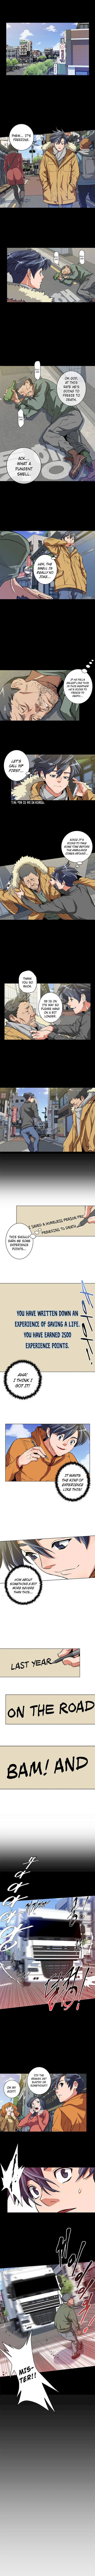 I Stack Experience Through Writing Books - Chapter 2 Page 5